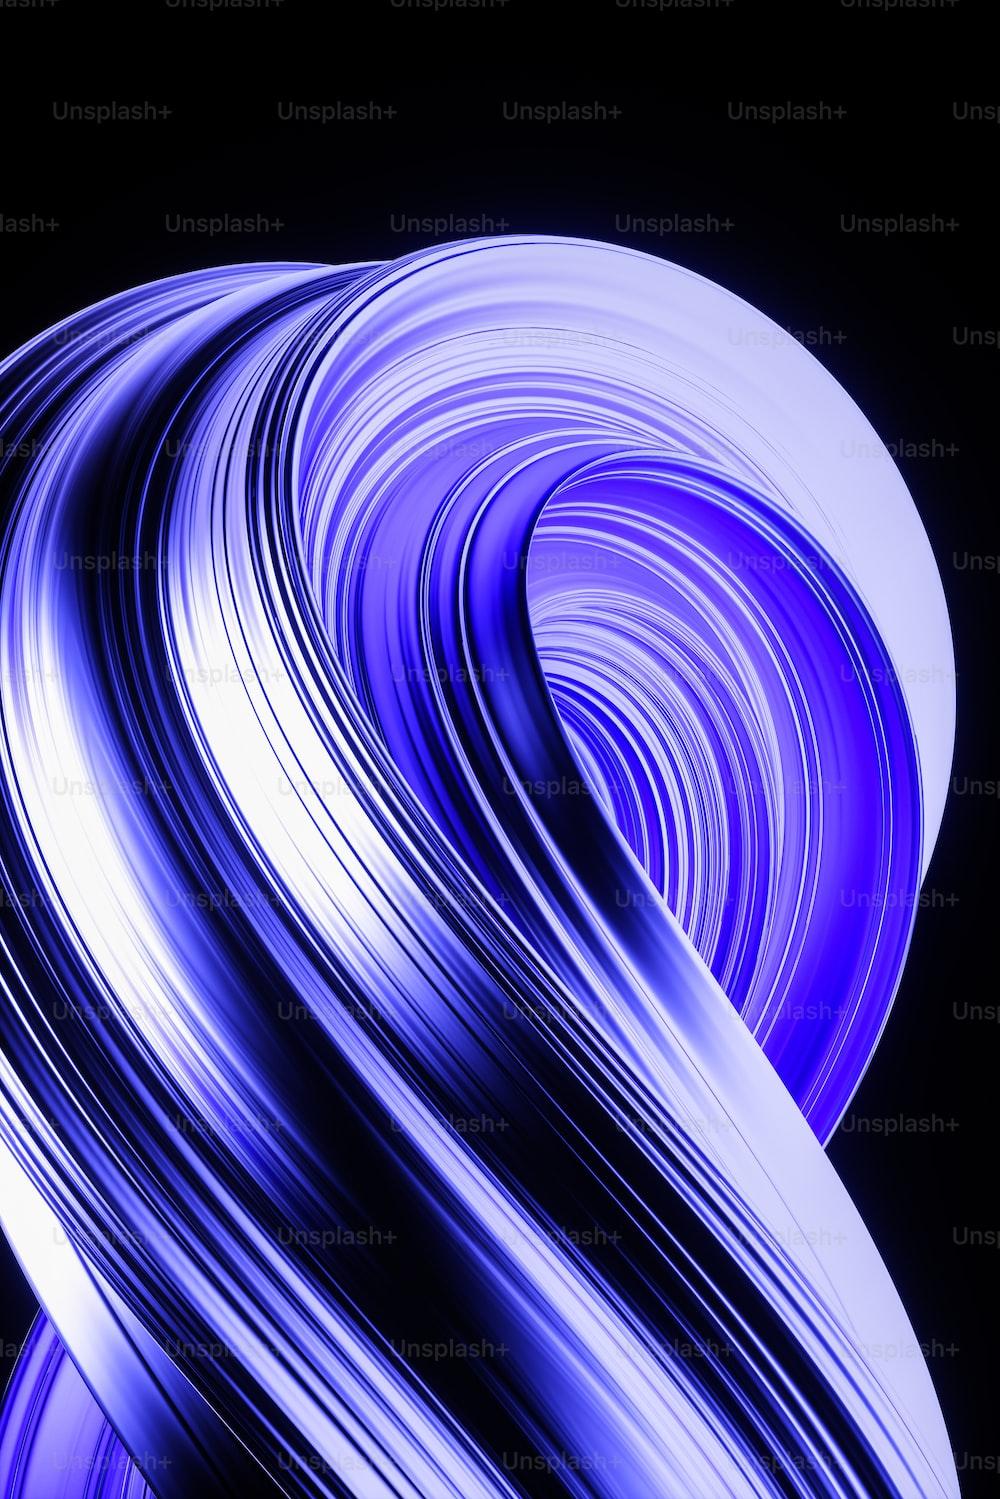 A Blue And White Swirl On Black Background Photo Line Pattern